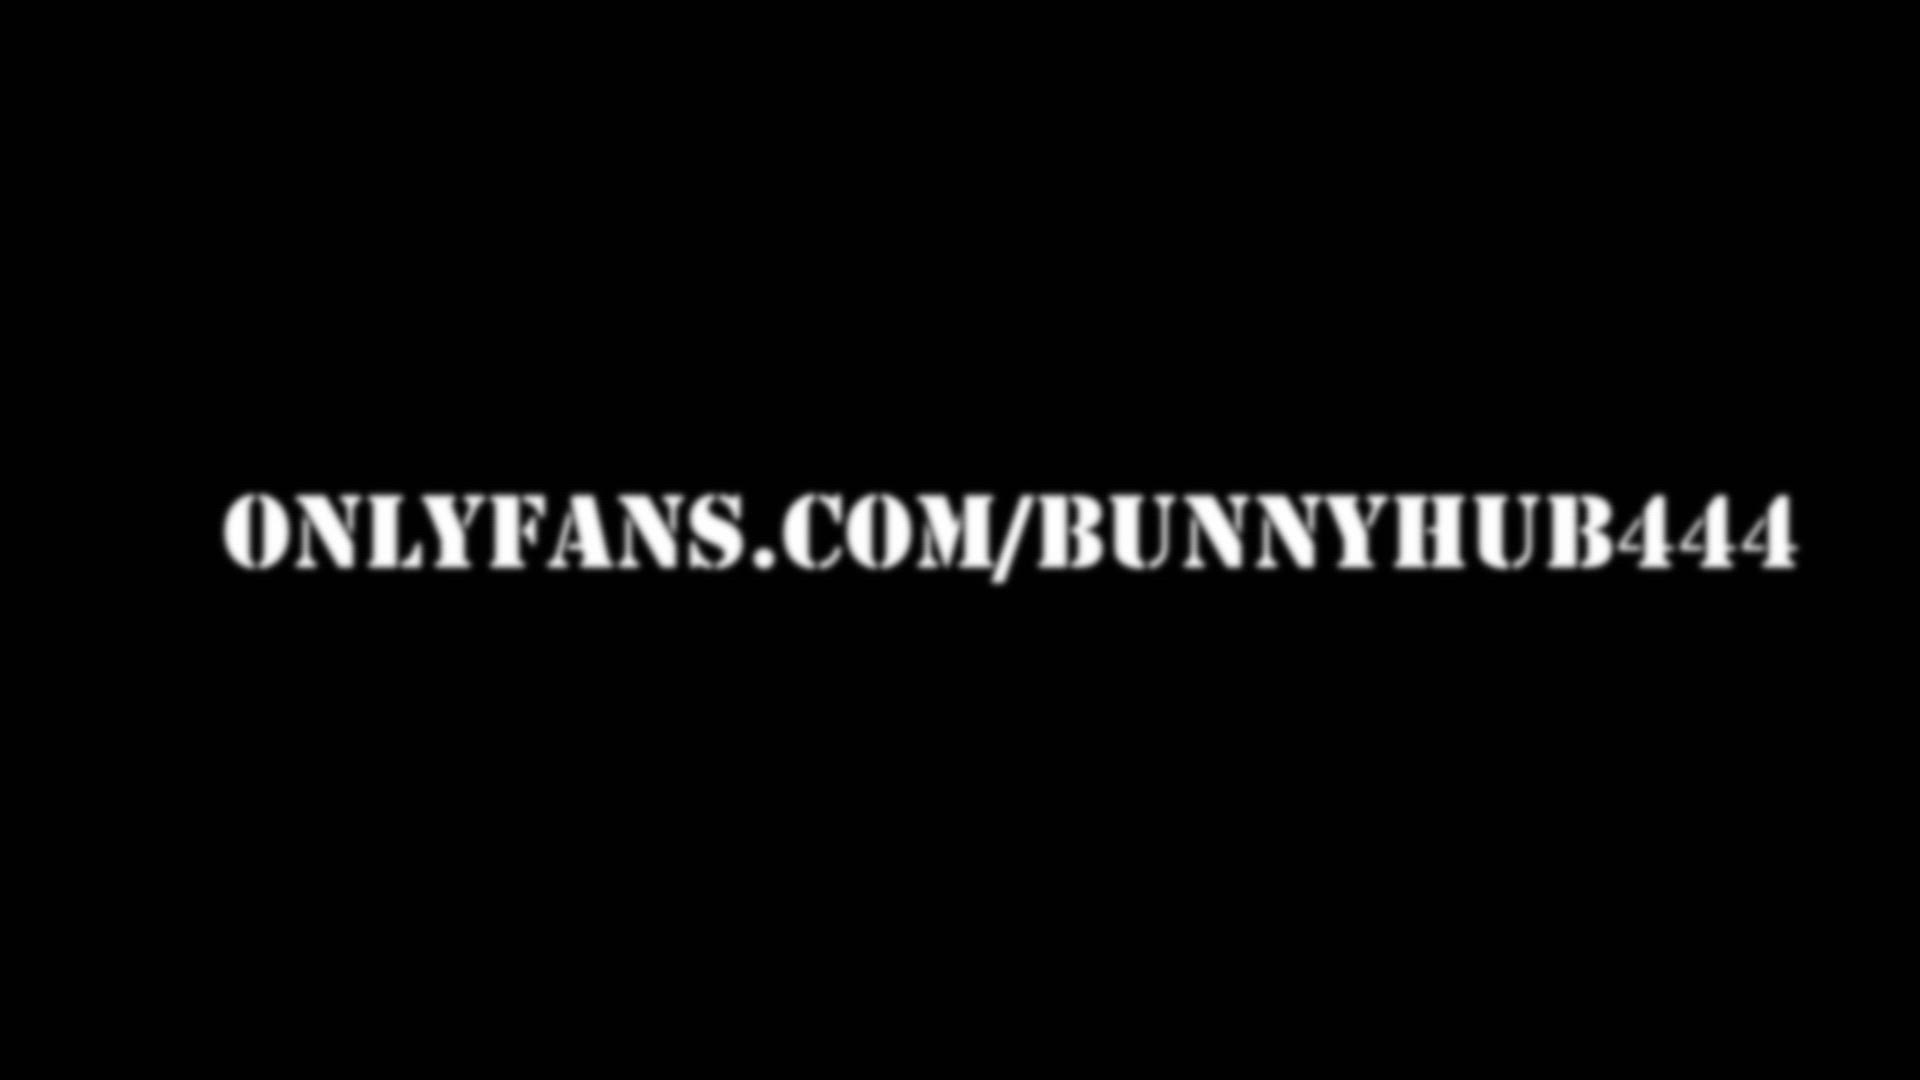 OnlyFans porn video with onlyfans model bunnyhub444 <strong>@bunnyhub444</strong>